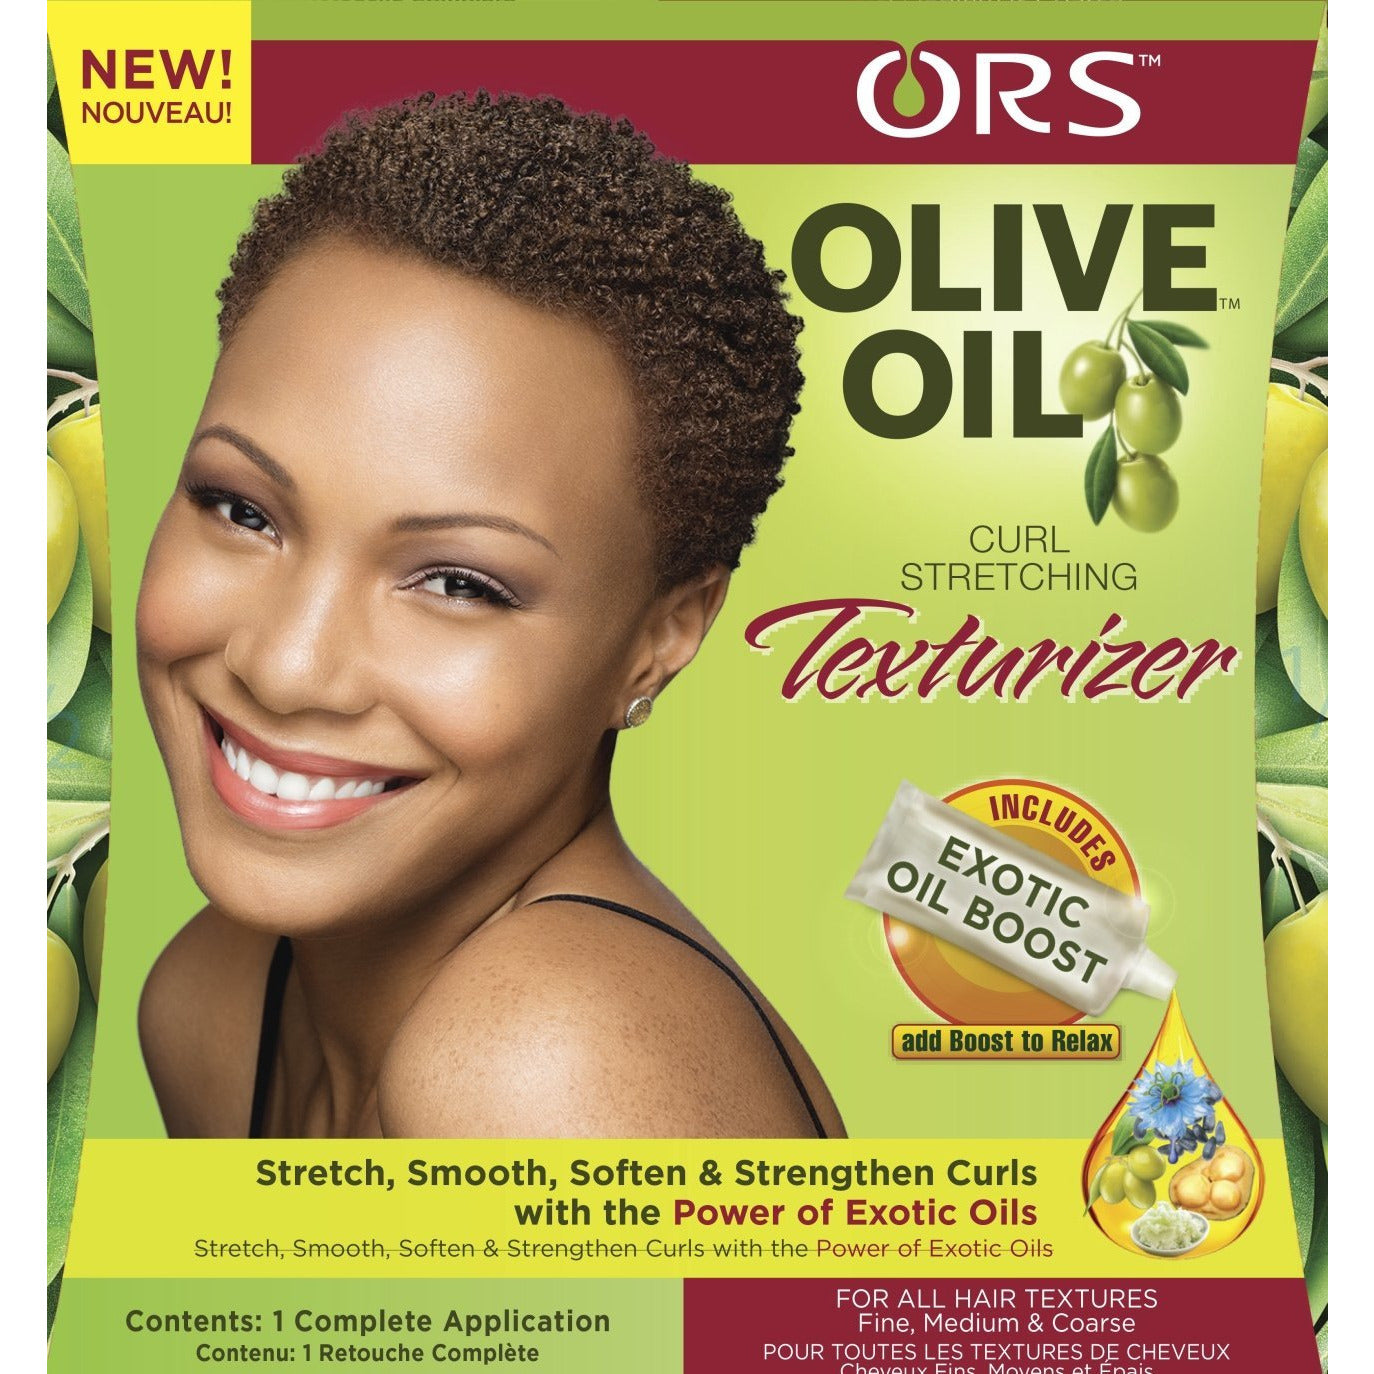 4th Ave Market: ORS Olive Oil Incredibly Rich Oil Moisturizing Hair Lotion 1 oz